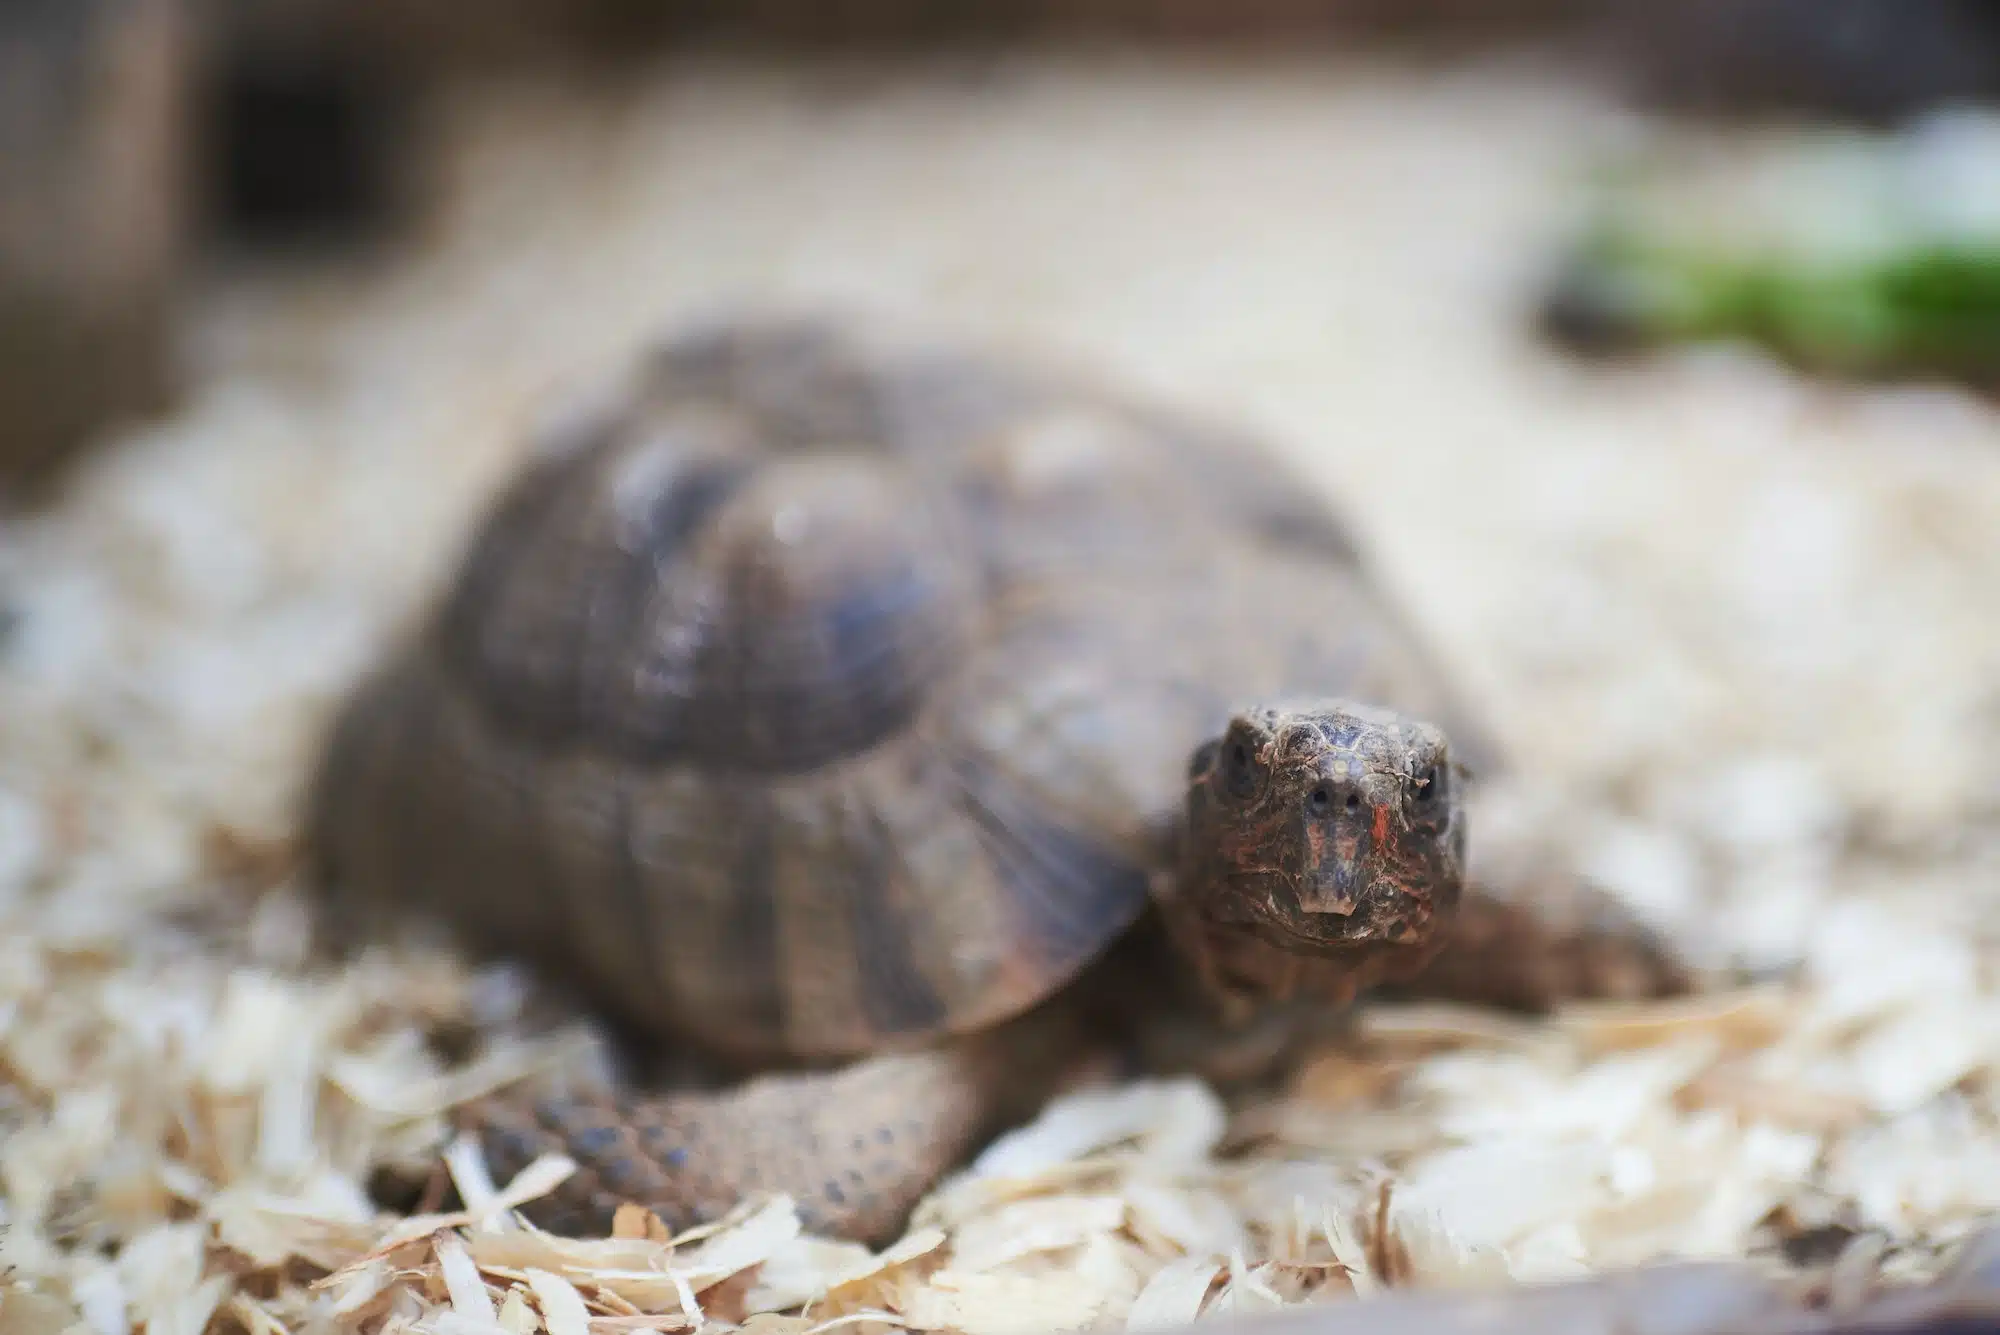 Portrait of a tortoise with the focus on the face